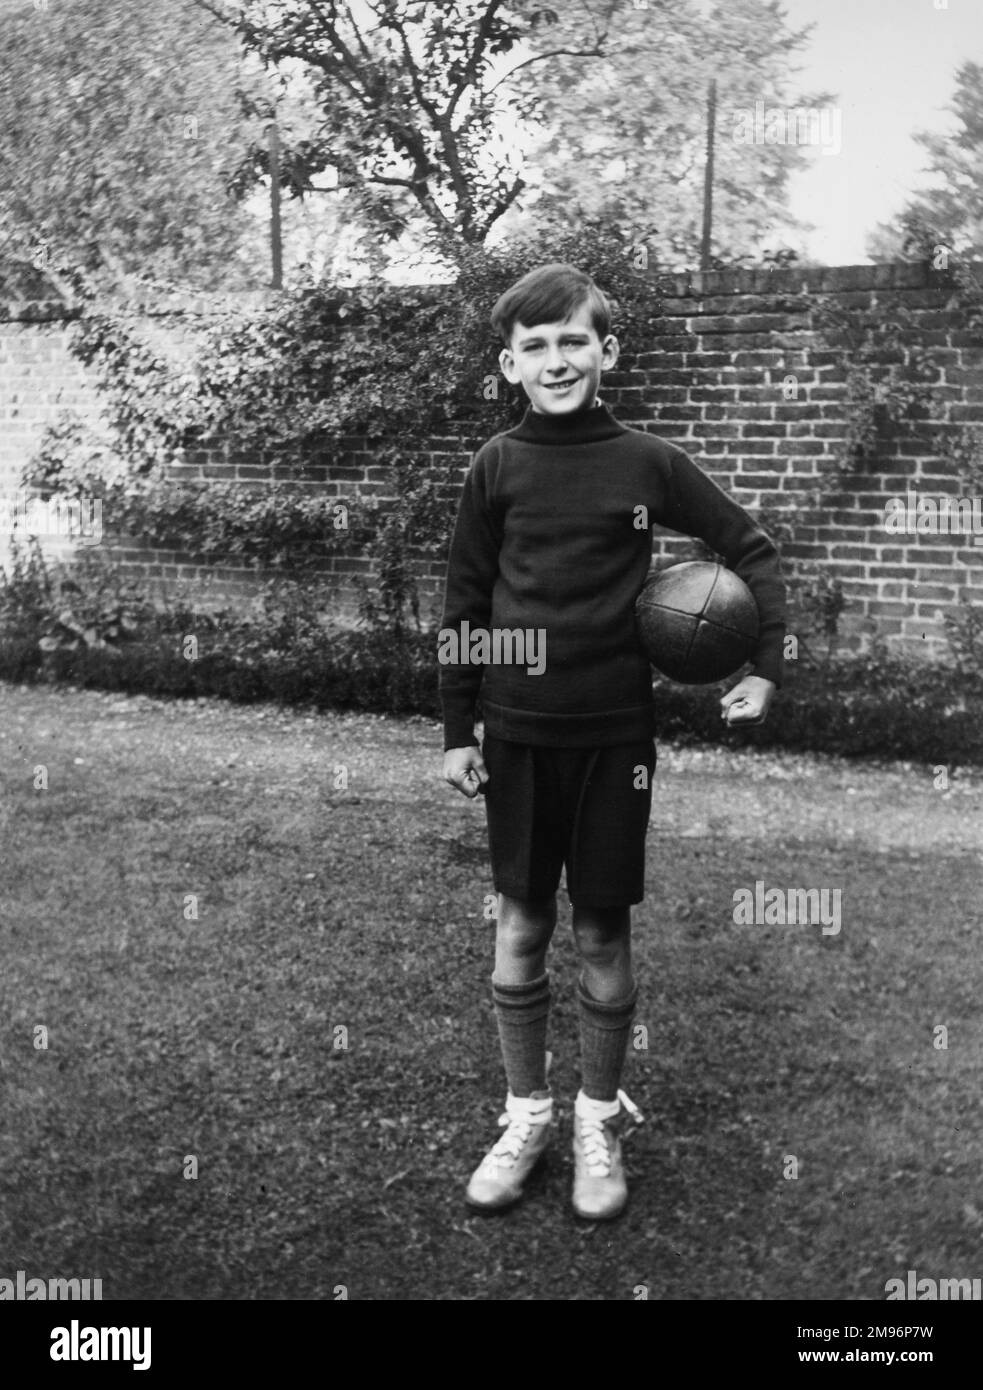 A boy standing in a garden wearing sports kit, with a rugby ball under his arm, at Eltham, south-east London. Stock Photo